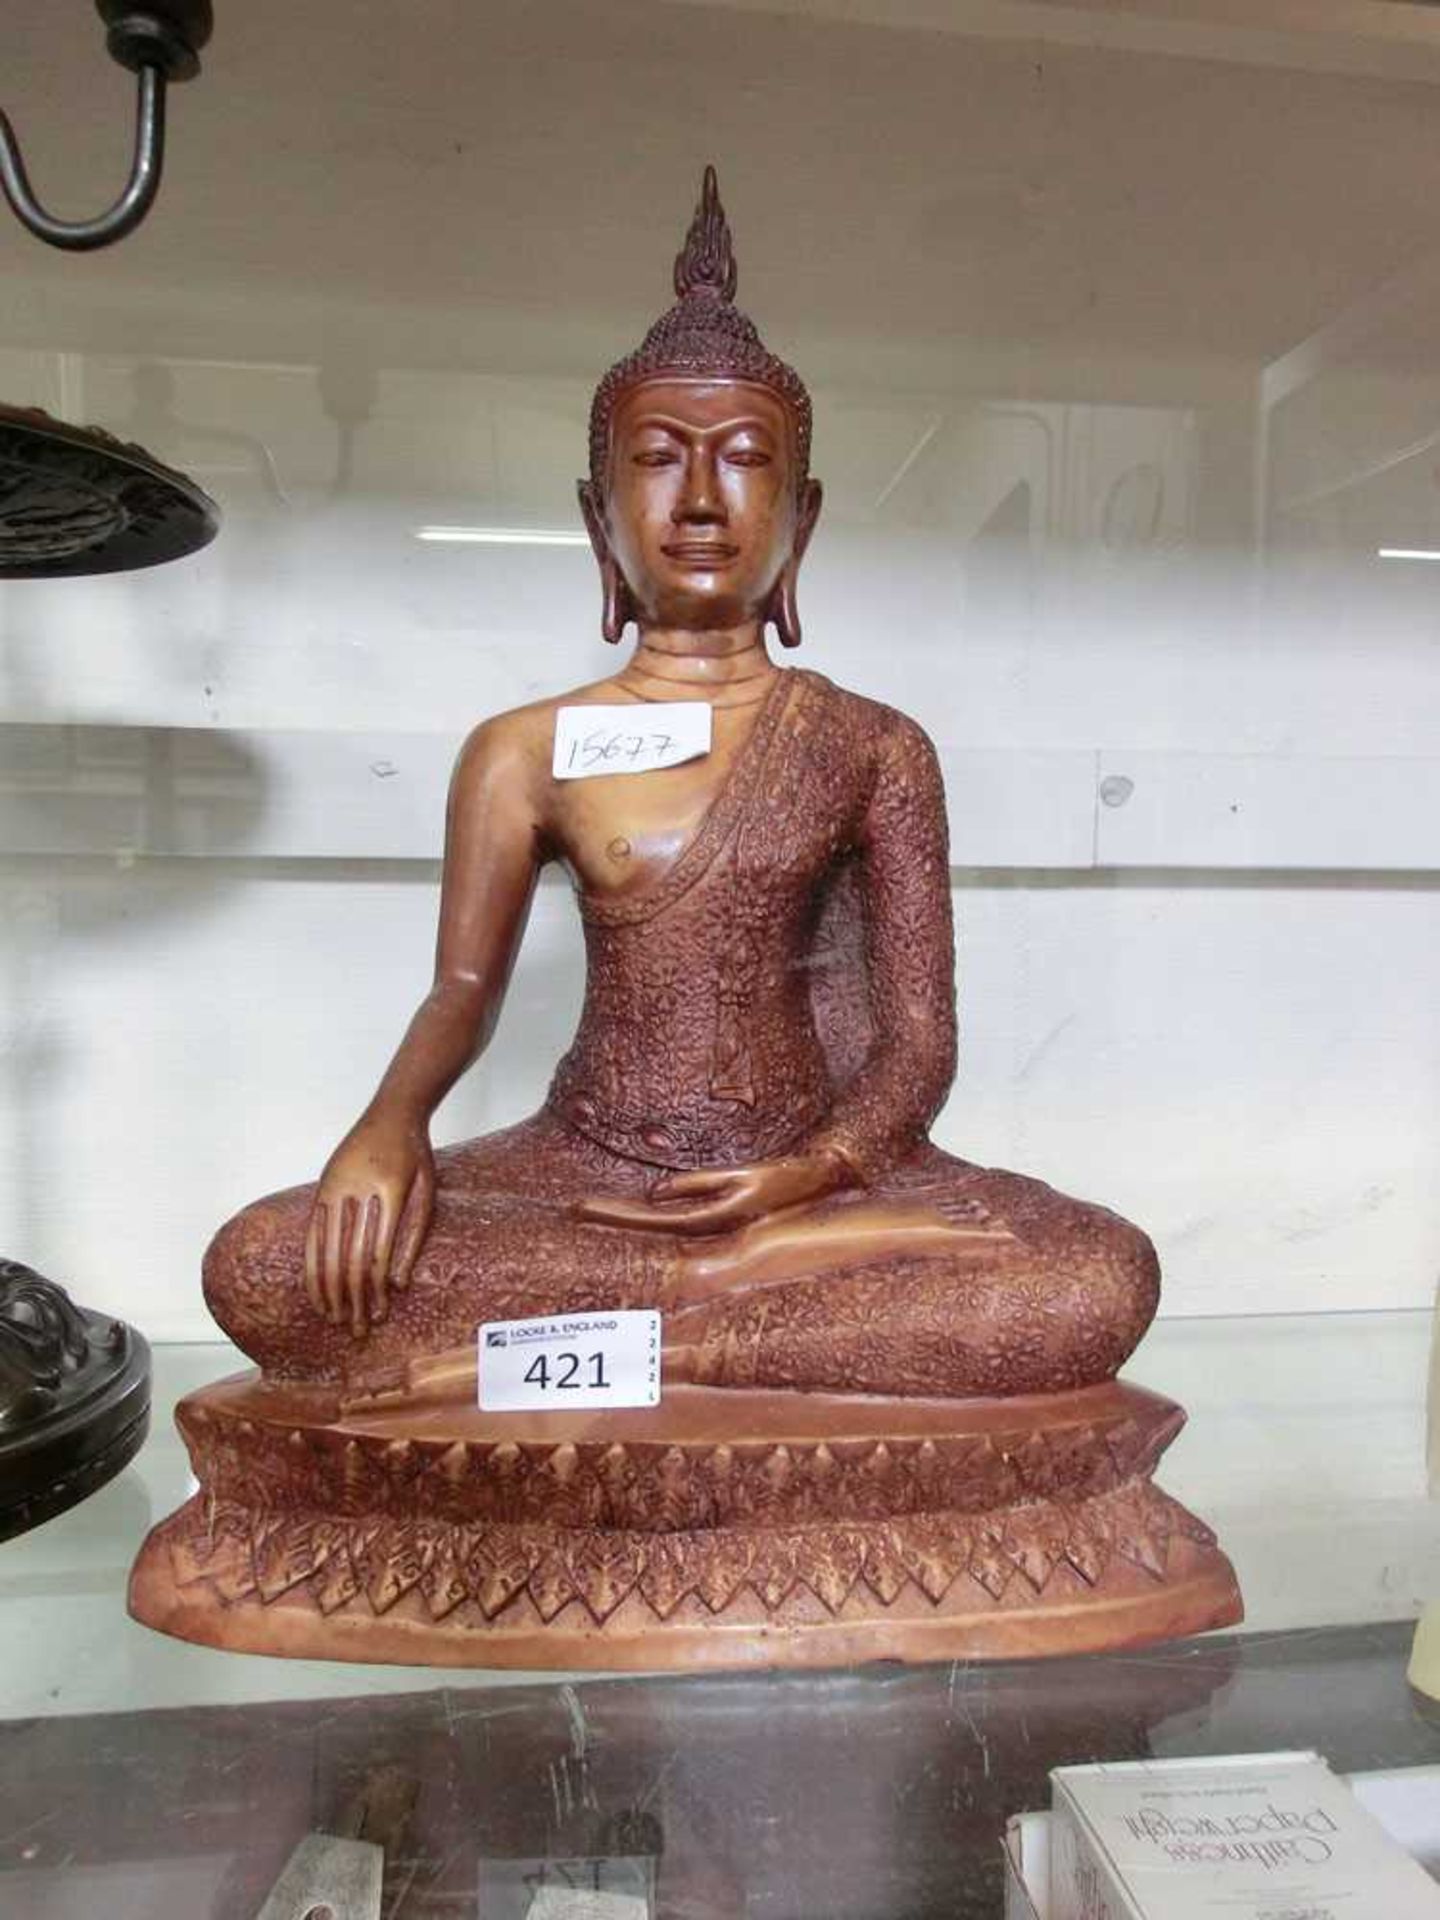 A moulded model of a sitting Buddha